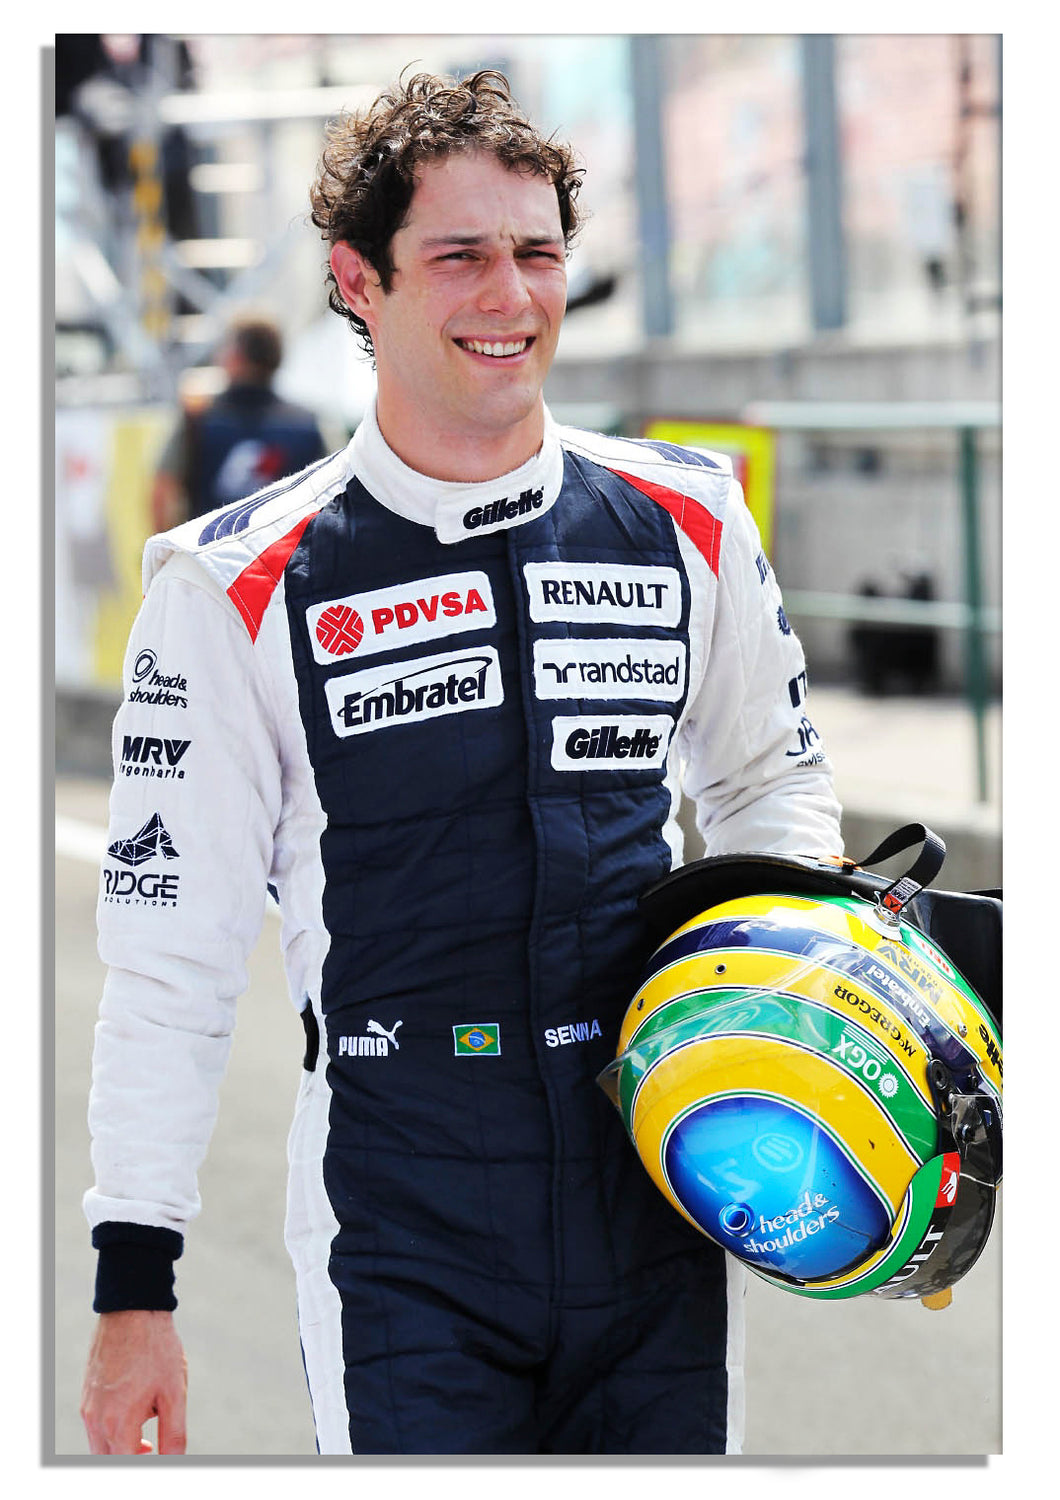 F1 Bruno Senna 2012 Replica Embroidered Racing Suit